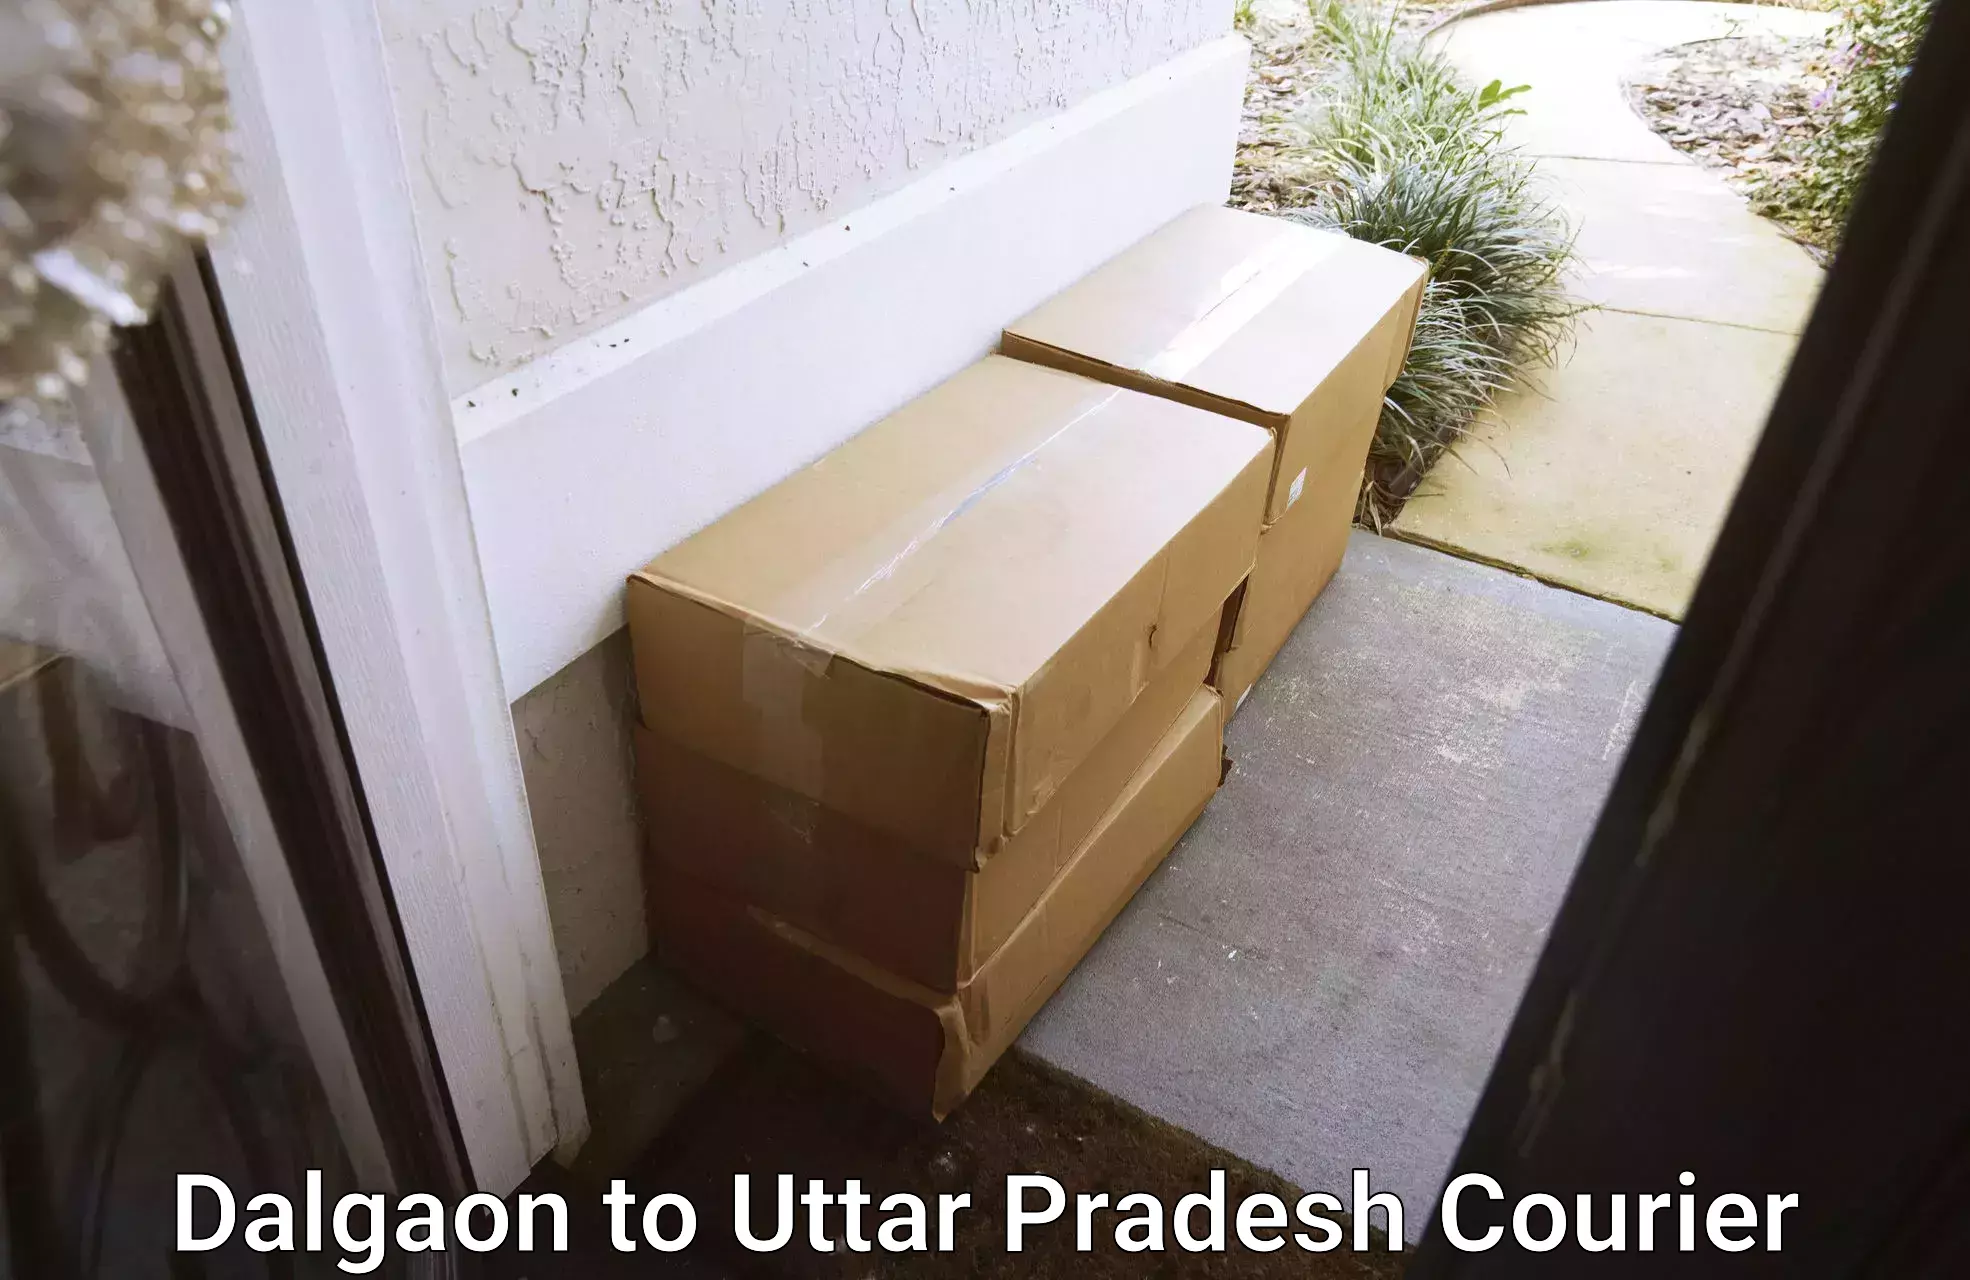 Personal courier services Dalgaon to Budhana